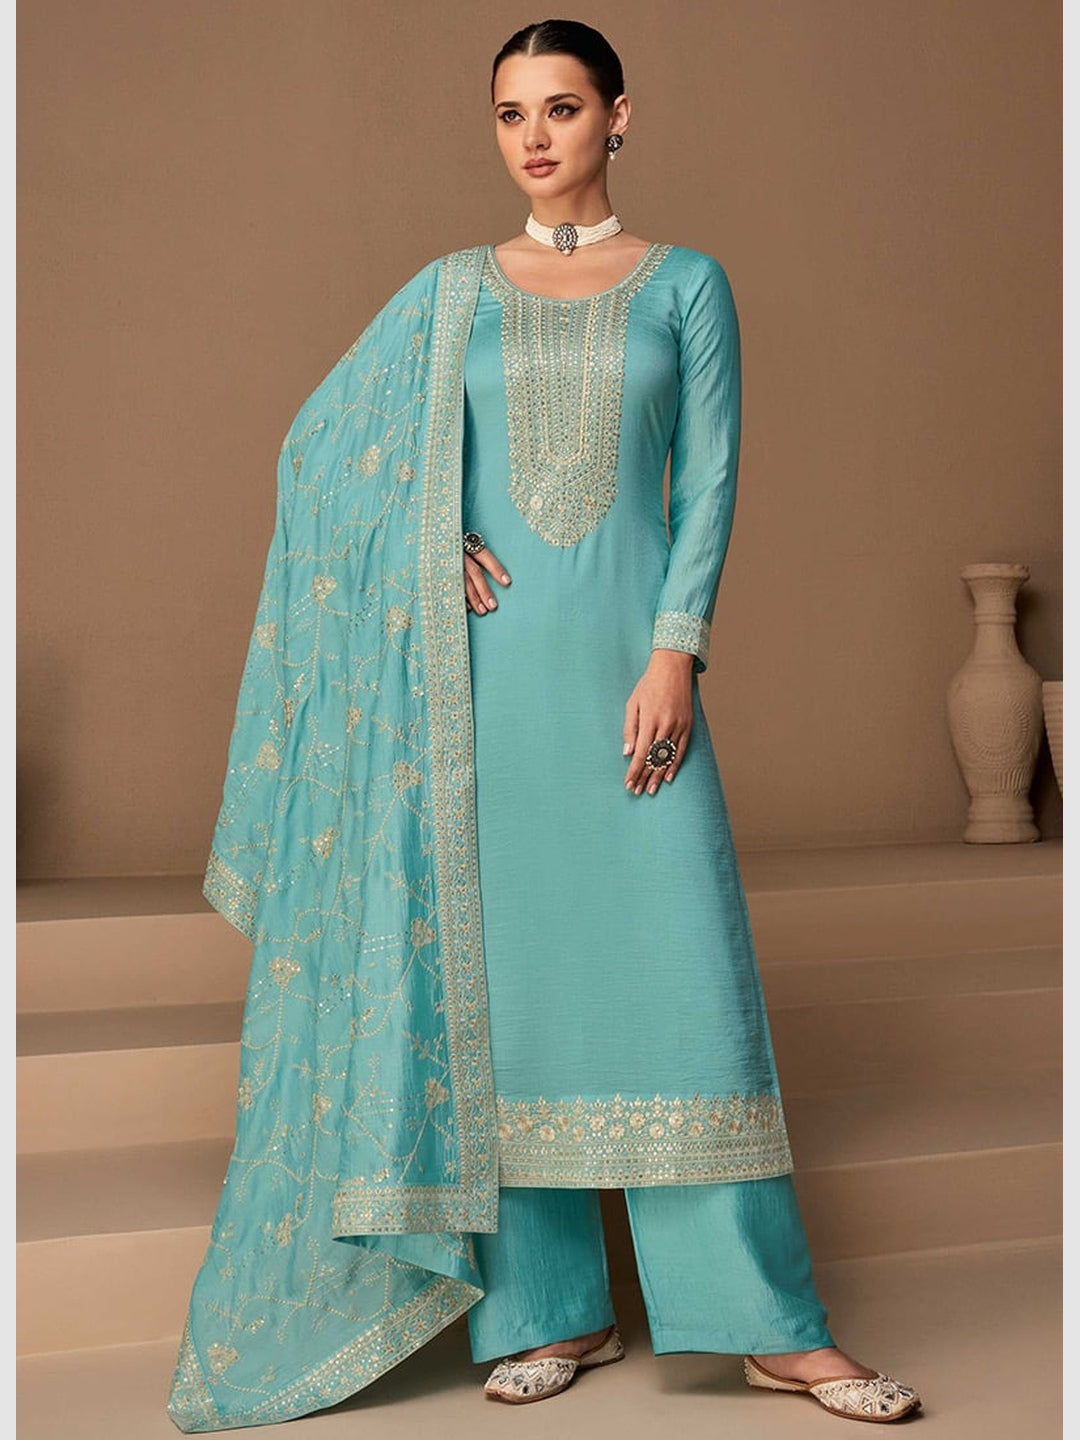 Buy Peachmode Appealing Aqua Green Colored Embroidered Chanderi Silk Salwar  Suit - at Best Price Best Indian Collection Saree - Gia Designer